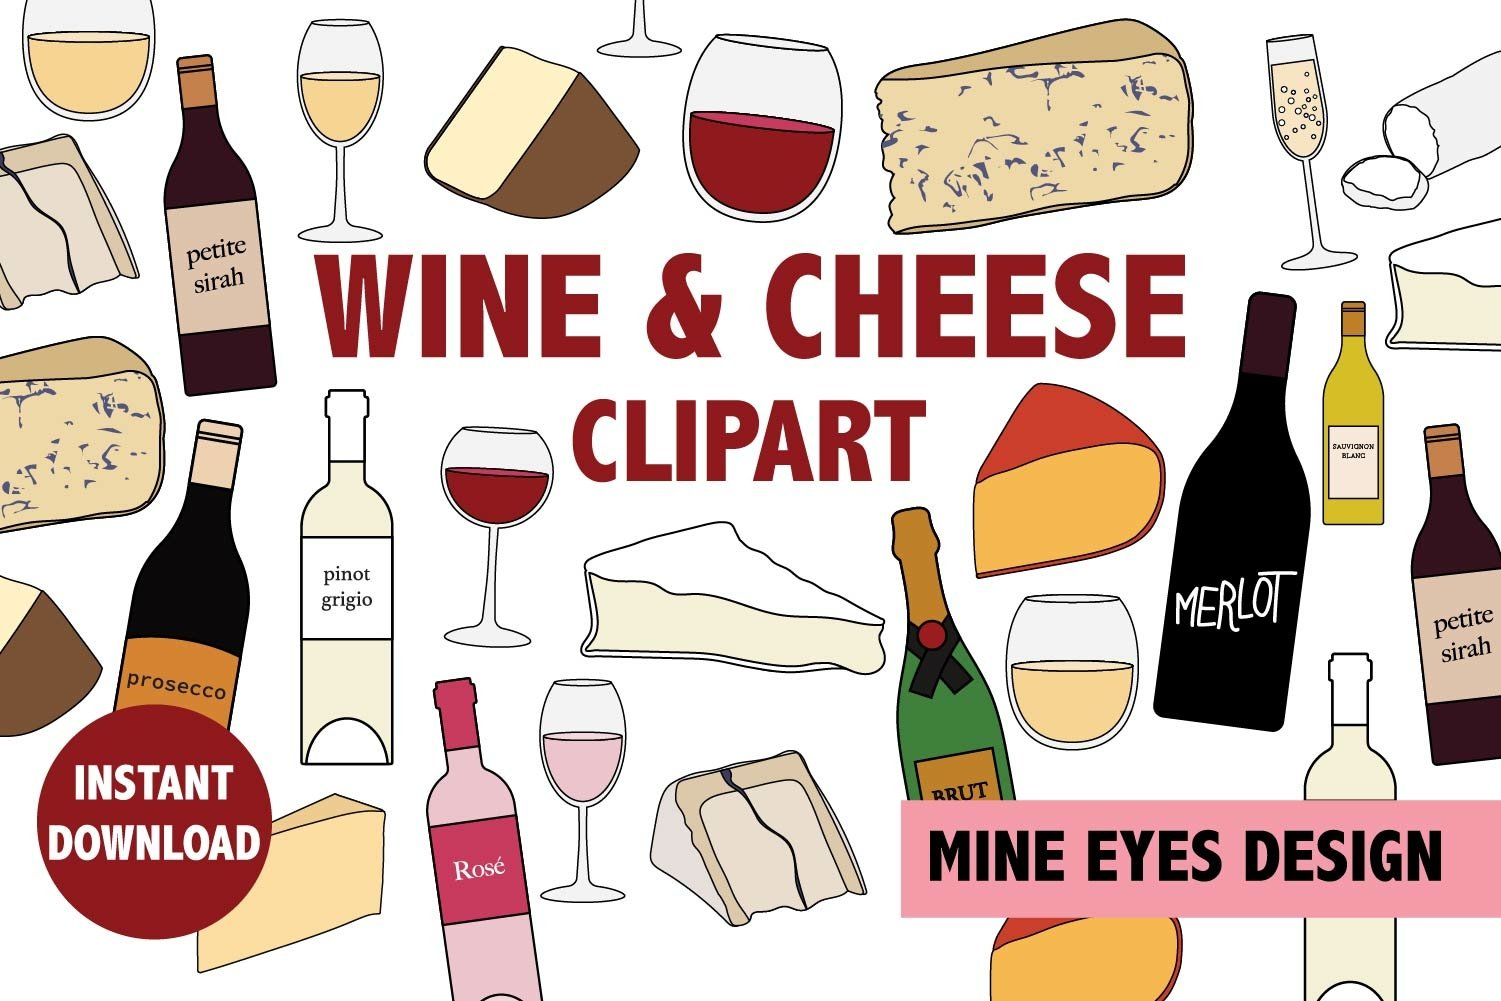 Gorgeous images of vintage wines and hard cheese.